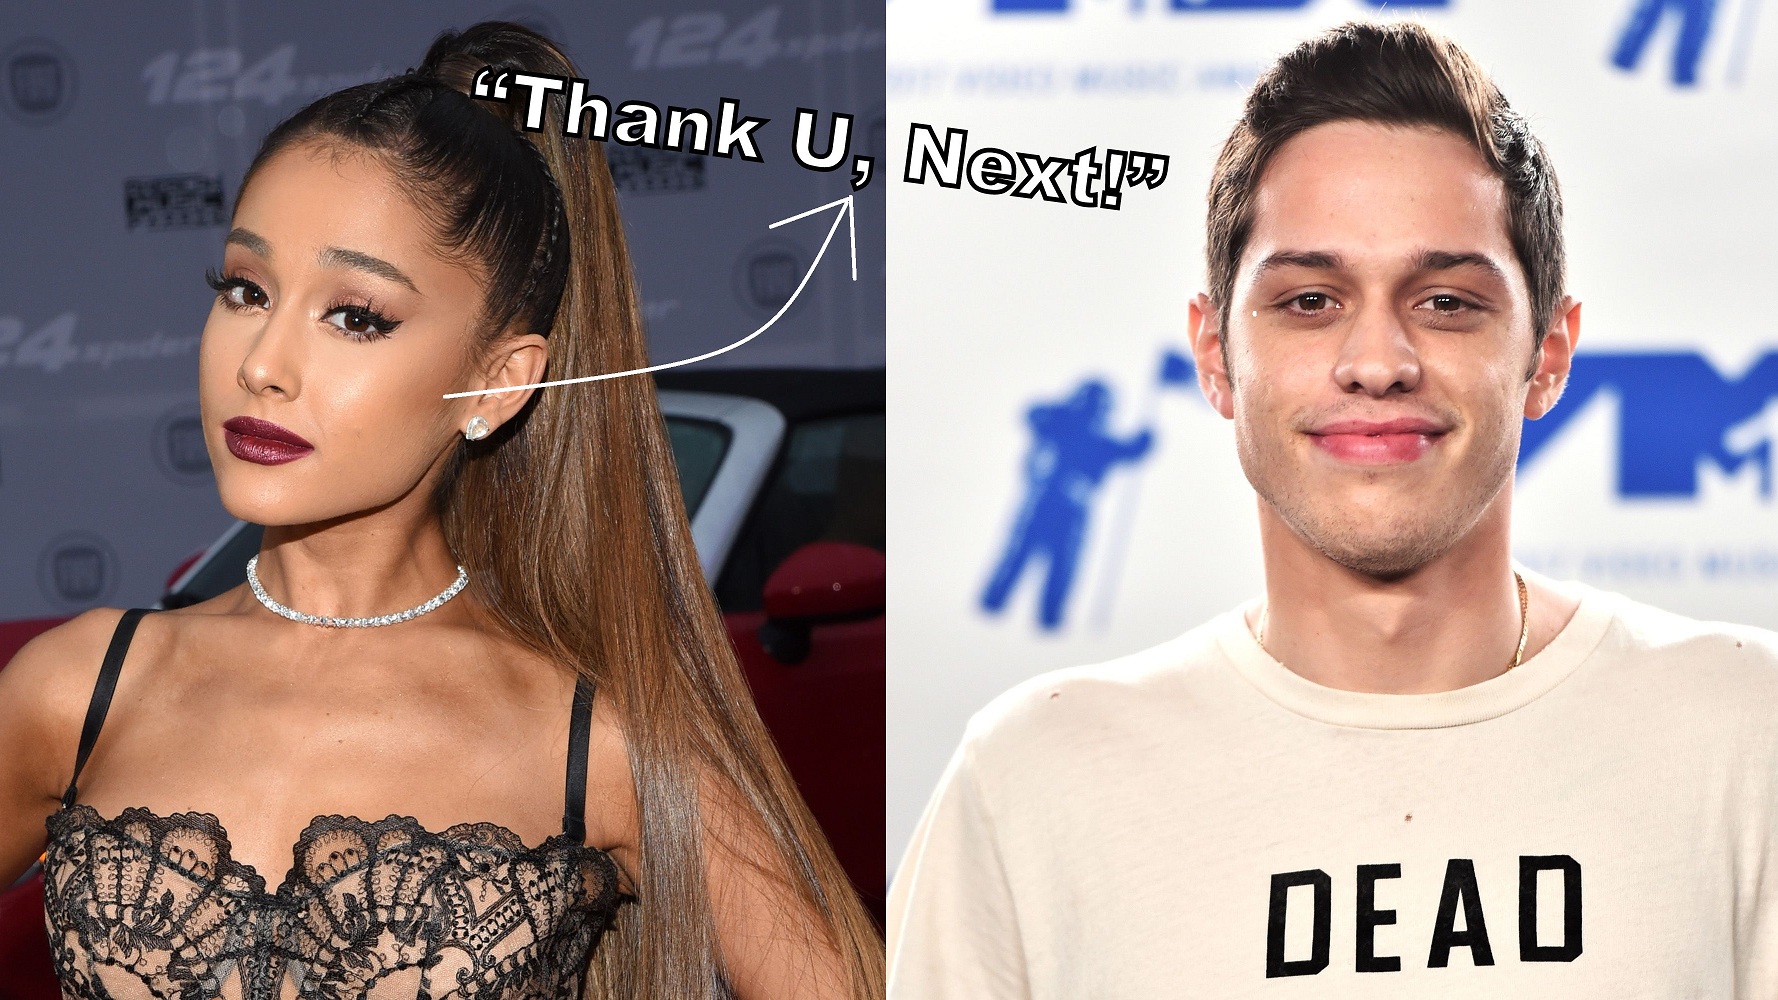 New Song: Ariana Grande Name-Drops Her Ex’s, Including Pete Davidson, in ‘Thank You, Next’